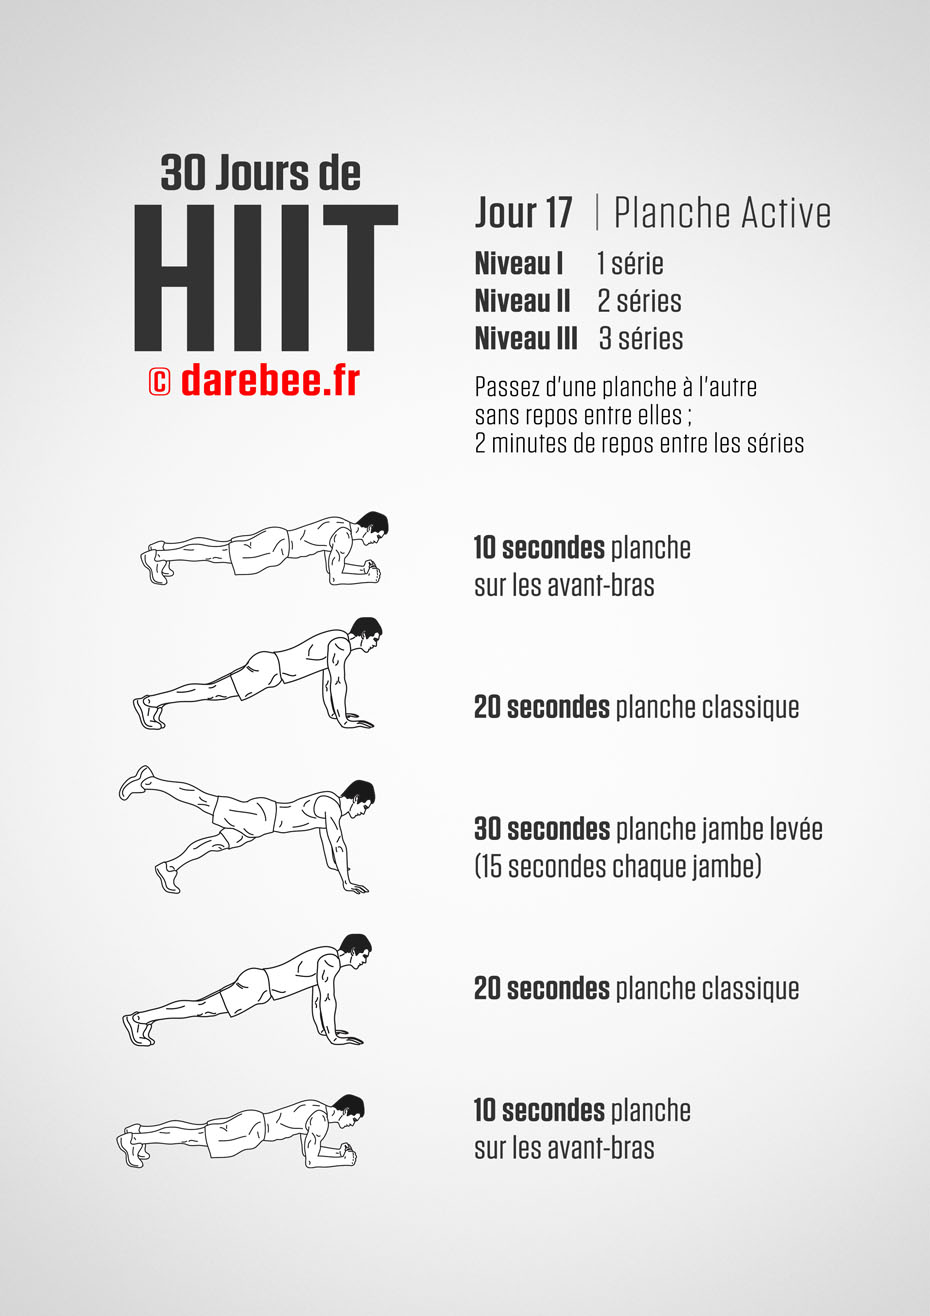 30 Days of HIIT by DAREBEE